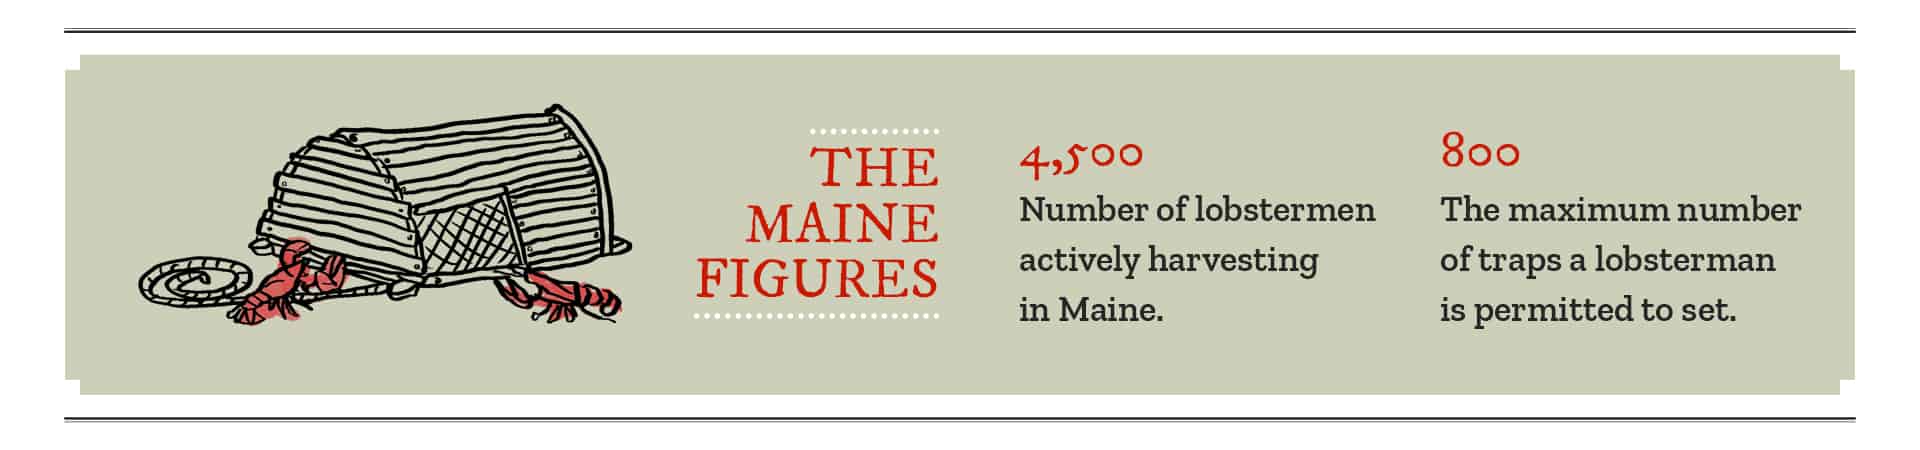 Maine lobstering Faqs